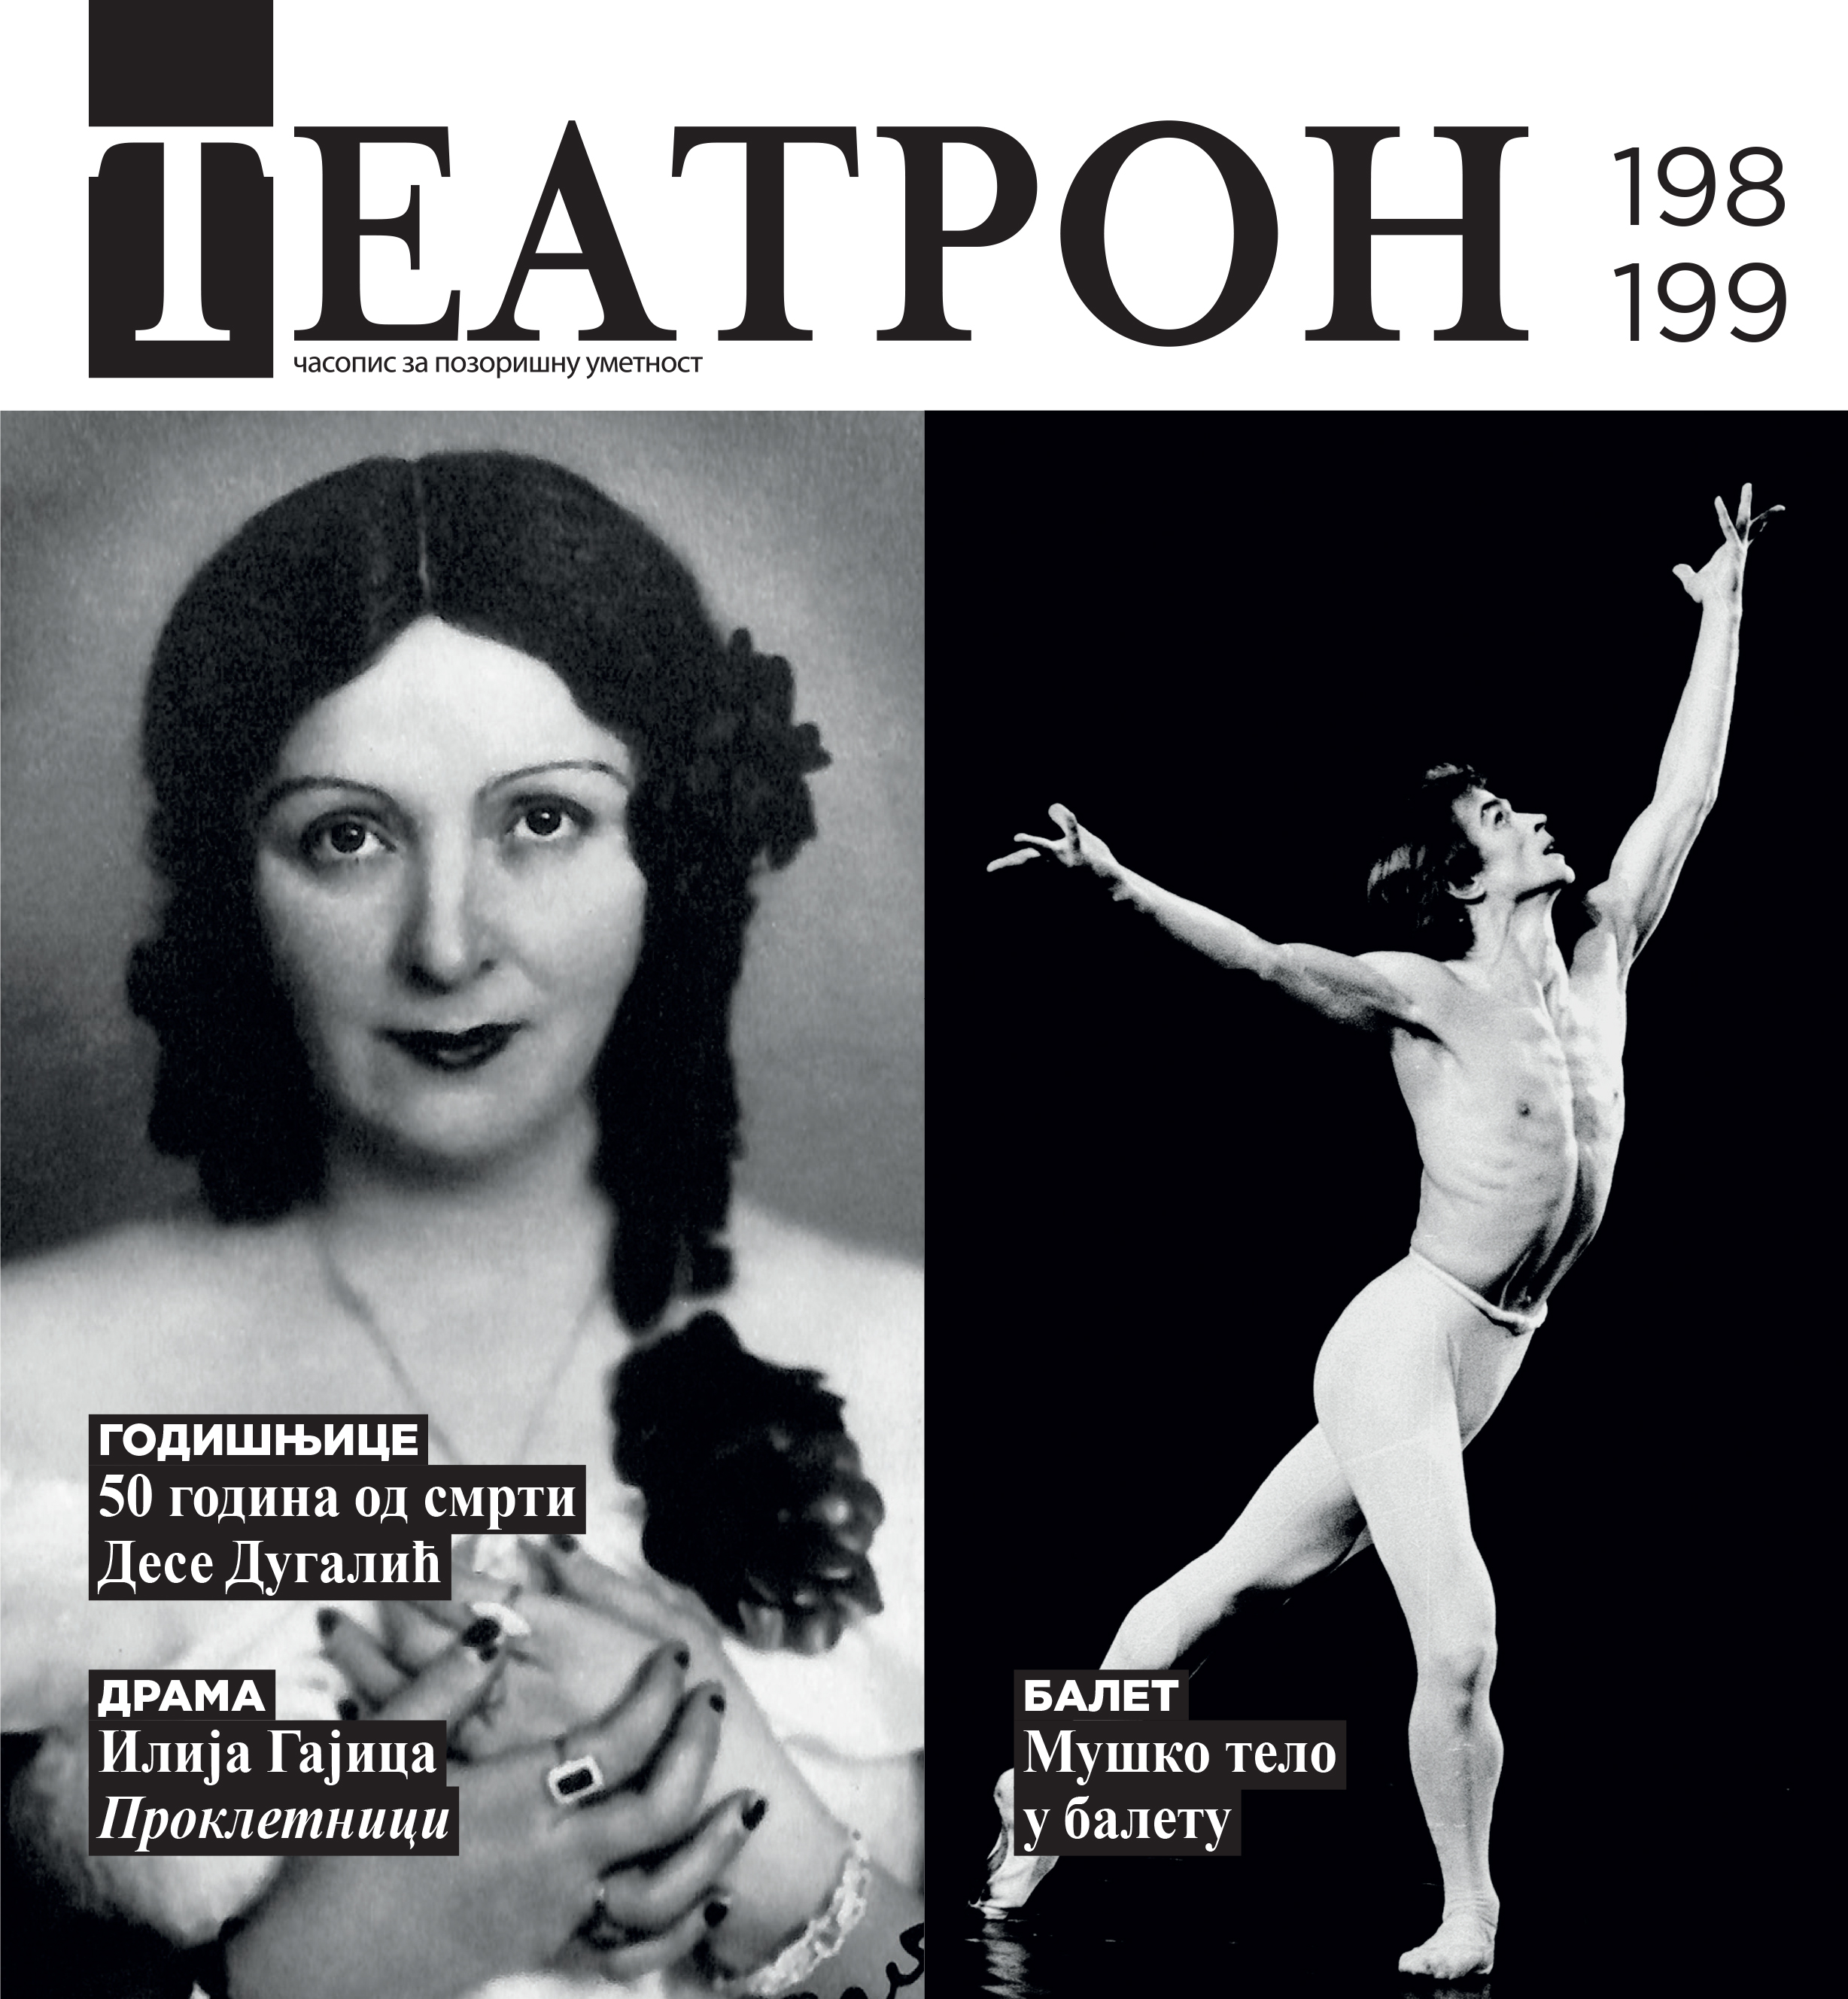 Controversal personality of actor Aleksandar Petrović Cover Image